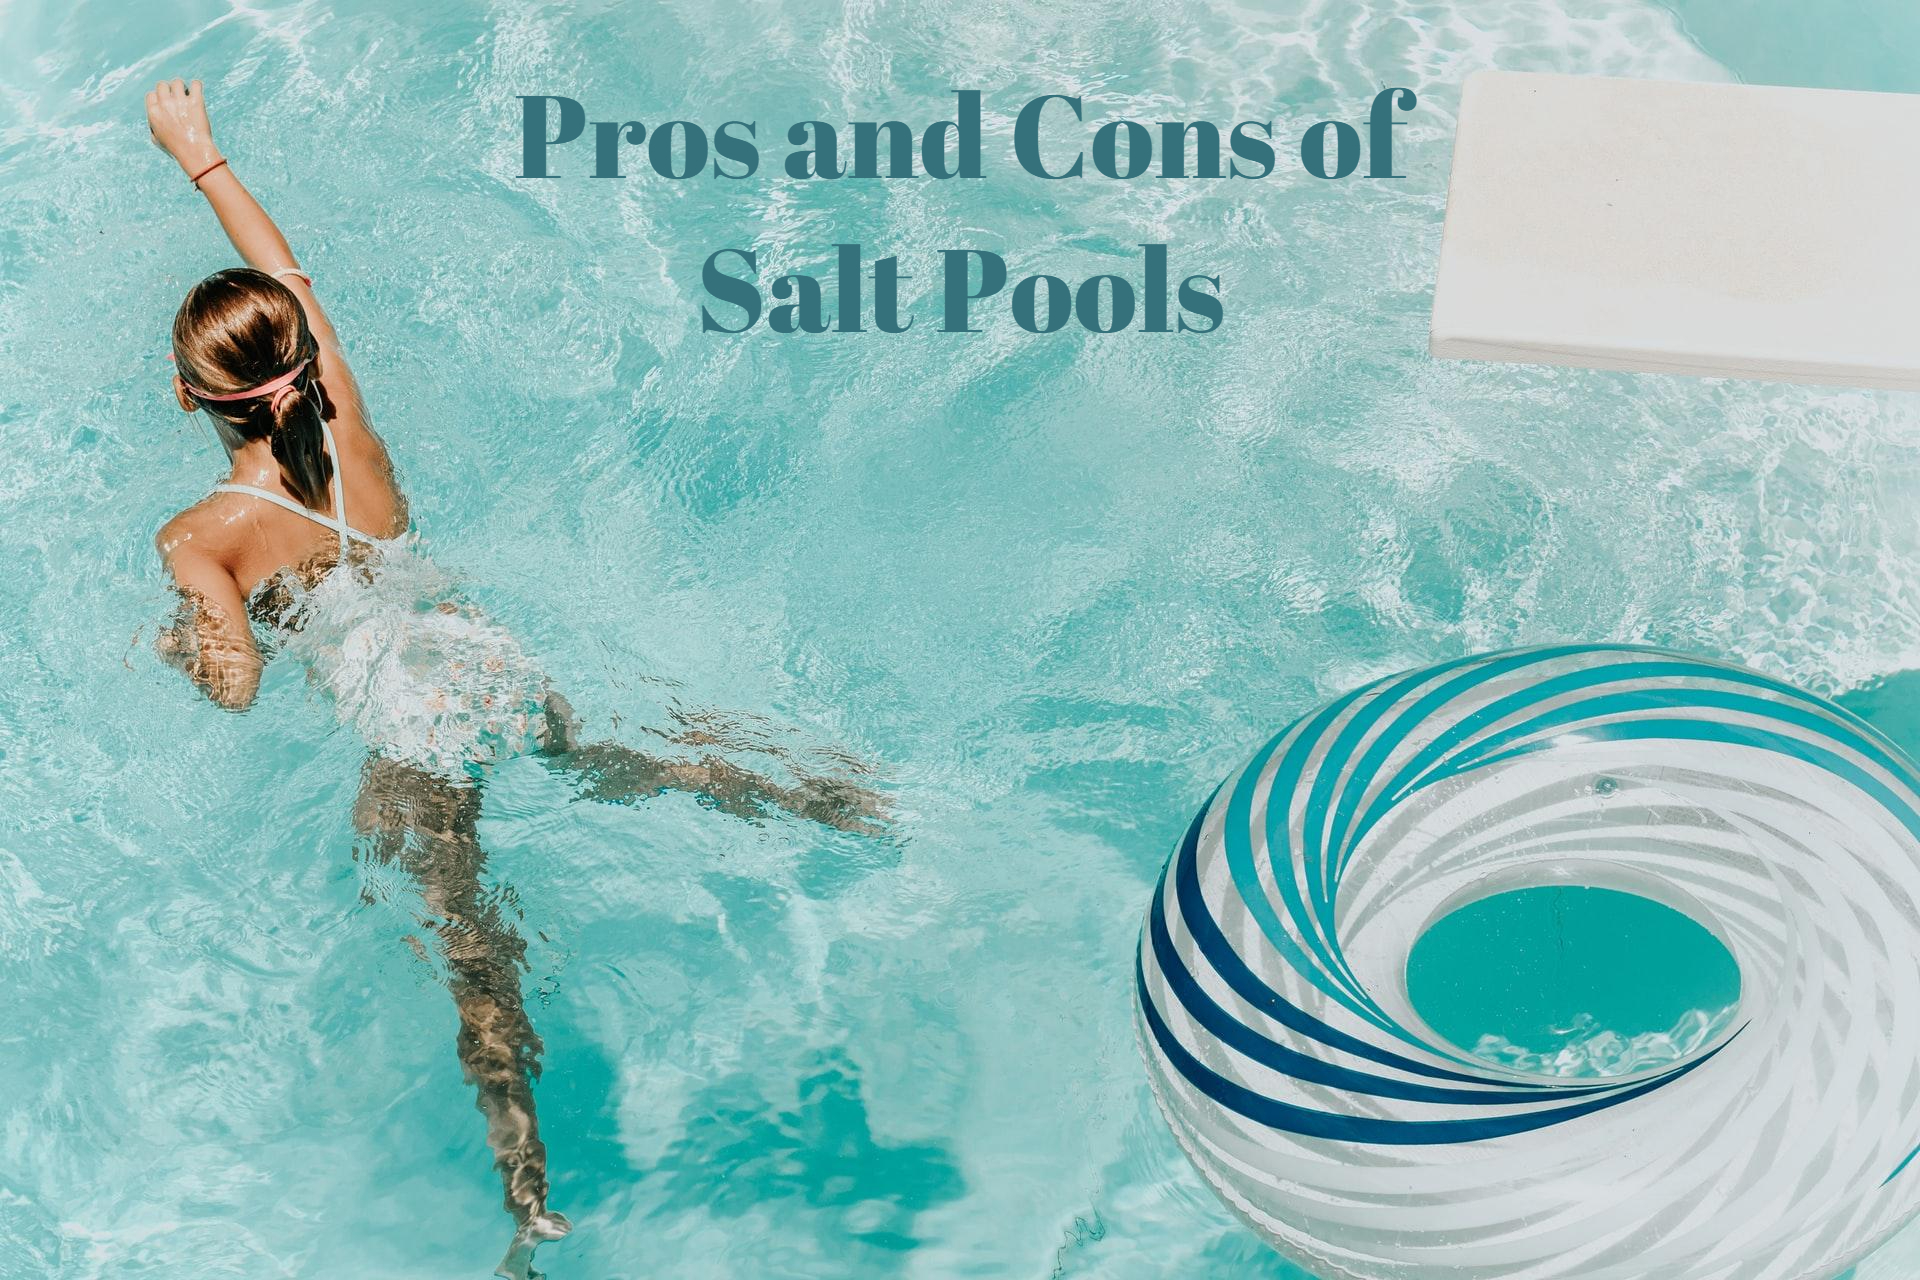 Pros and Cons of Salt Pools